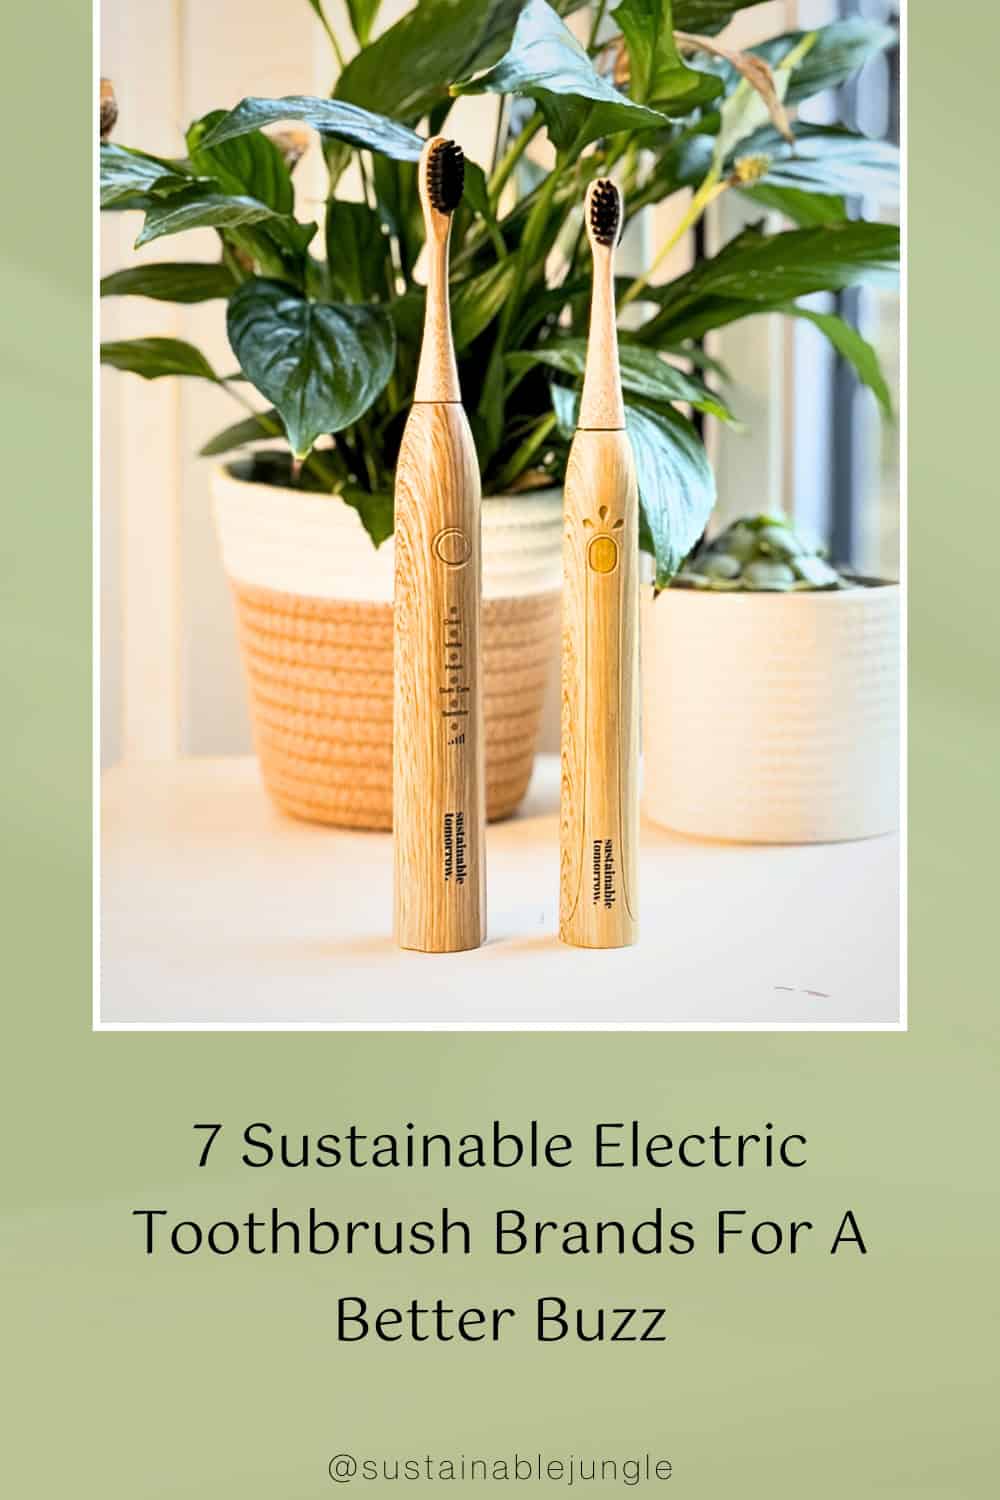 7 Sustainable Electric Toothbrush Brands For A Better Buzz Image by Sustainable Jungle #sustainableelectrictoothrbrush #electrictoothbrushsustainable #ecofriendlyelectrictoothbrush #ecofriendlytoothbrushheads #ecoelectrictoothbrush #bestsustainableelectrictoothbrush #sustainablejungle